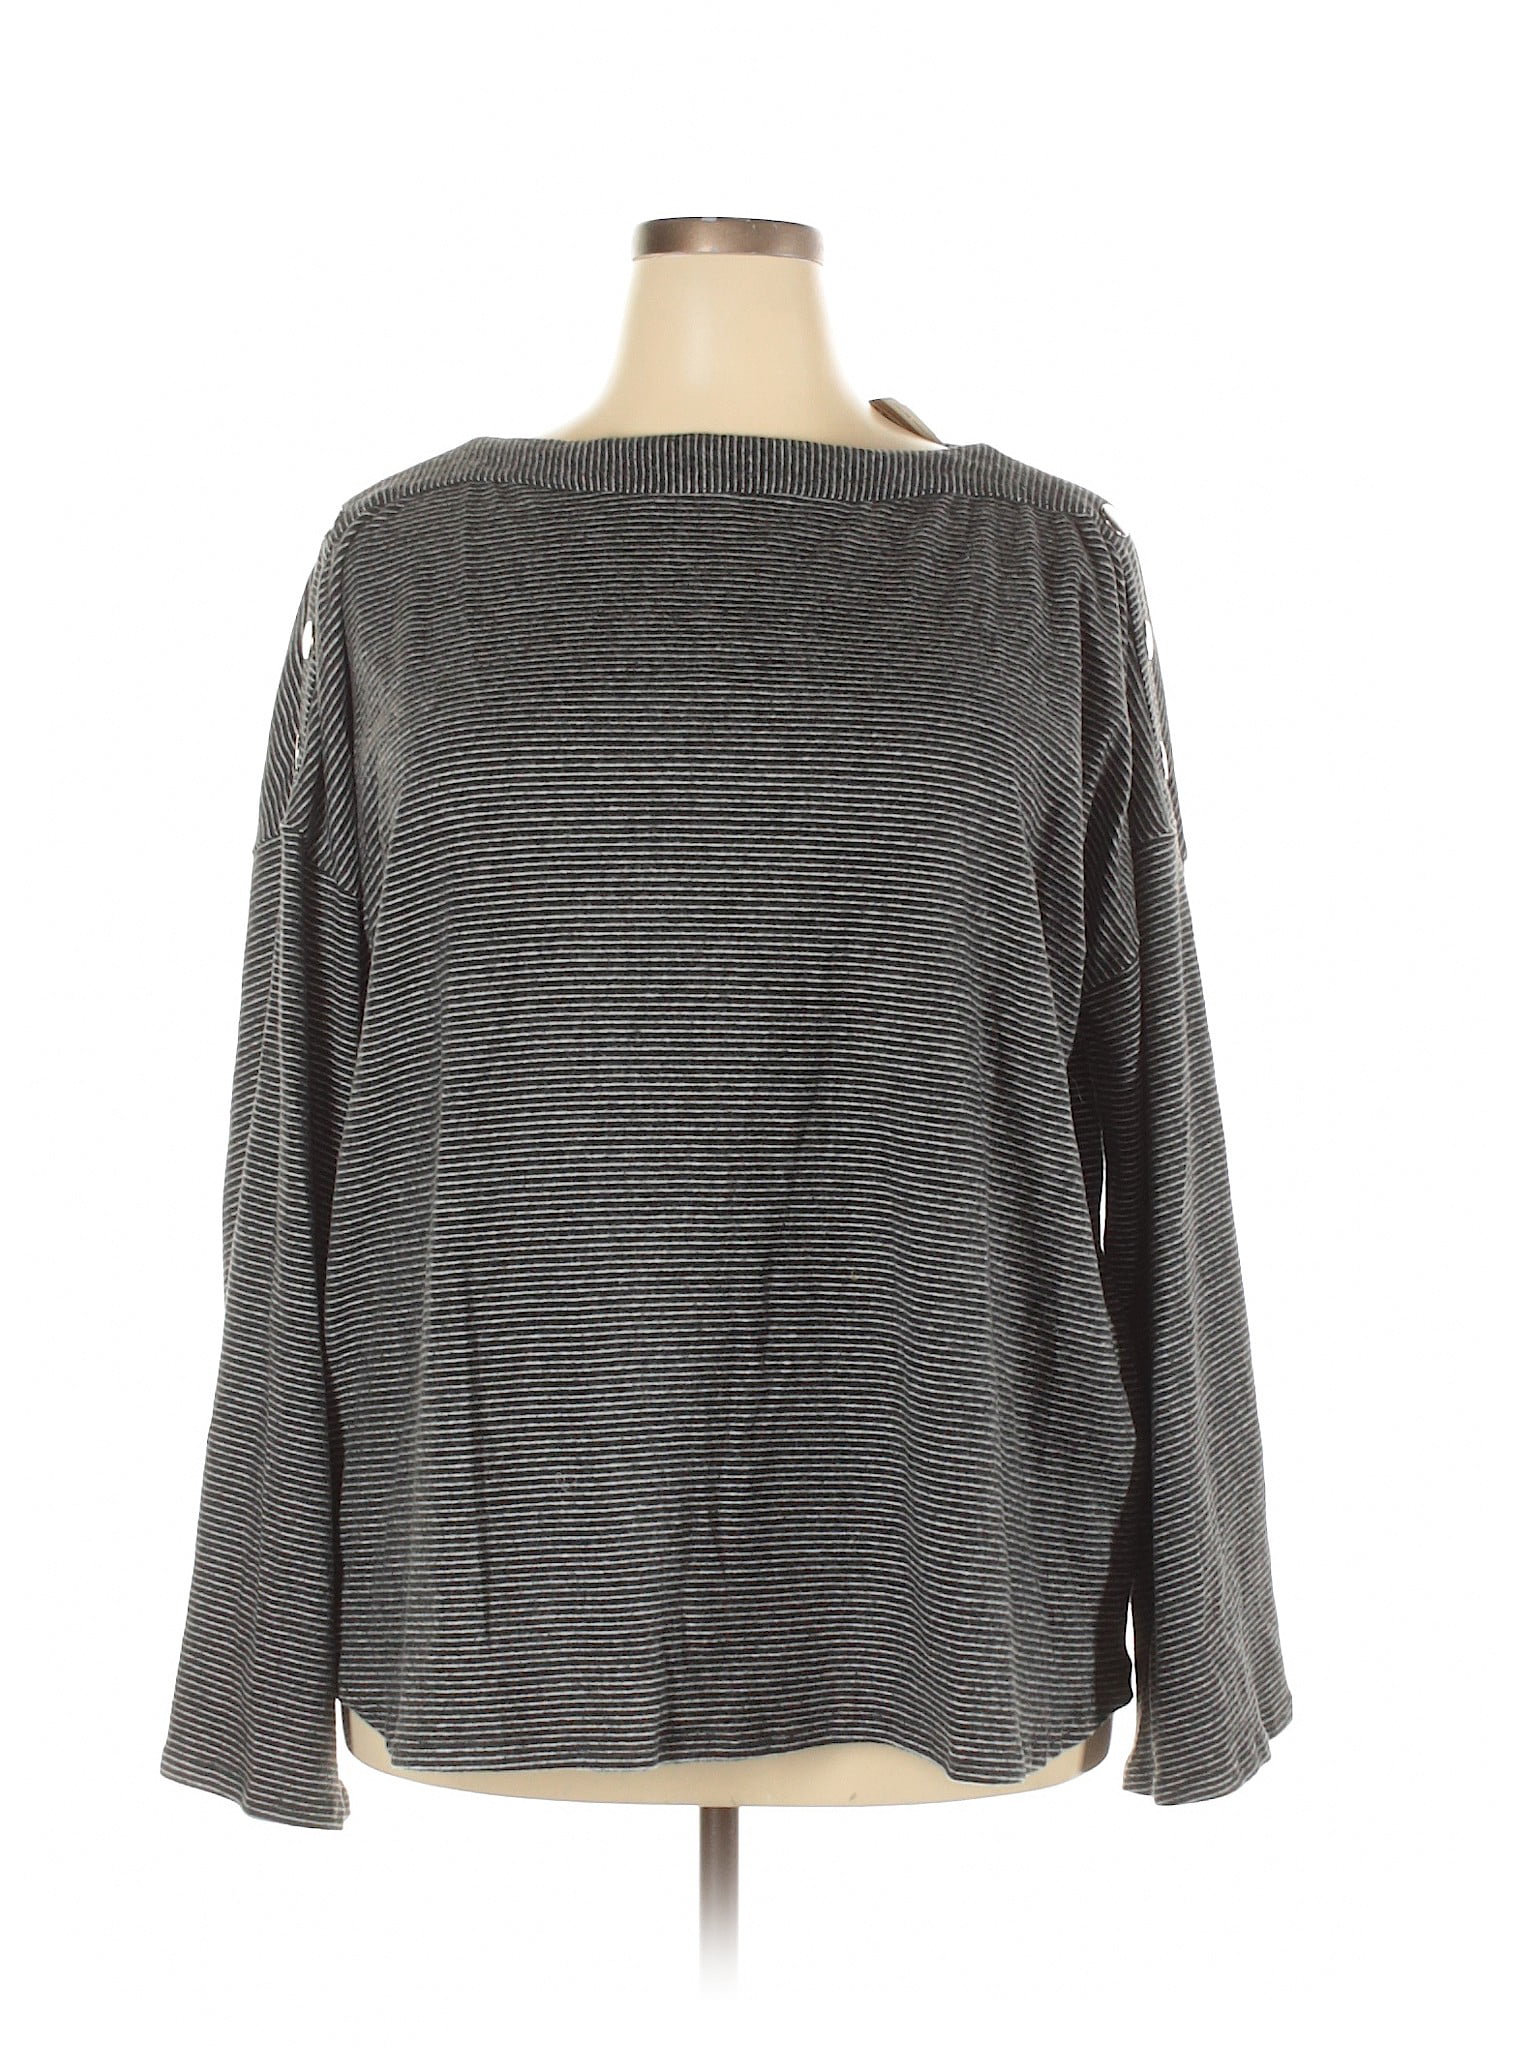 Suzanne Betro - Pre-Owned Suzanne Betro Women's Size 3X Plus Pullover ...